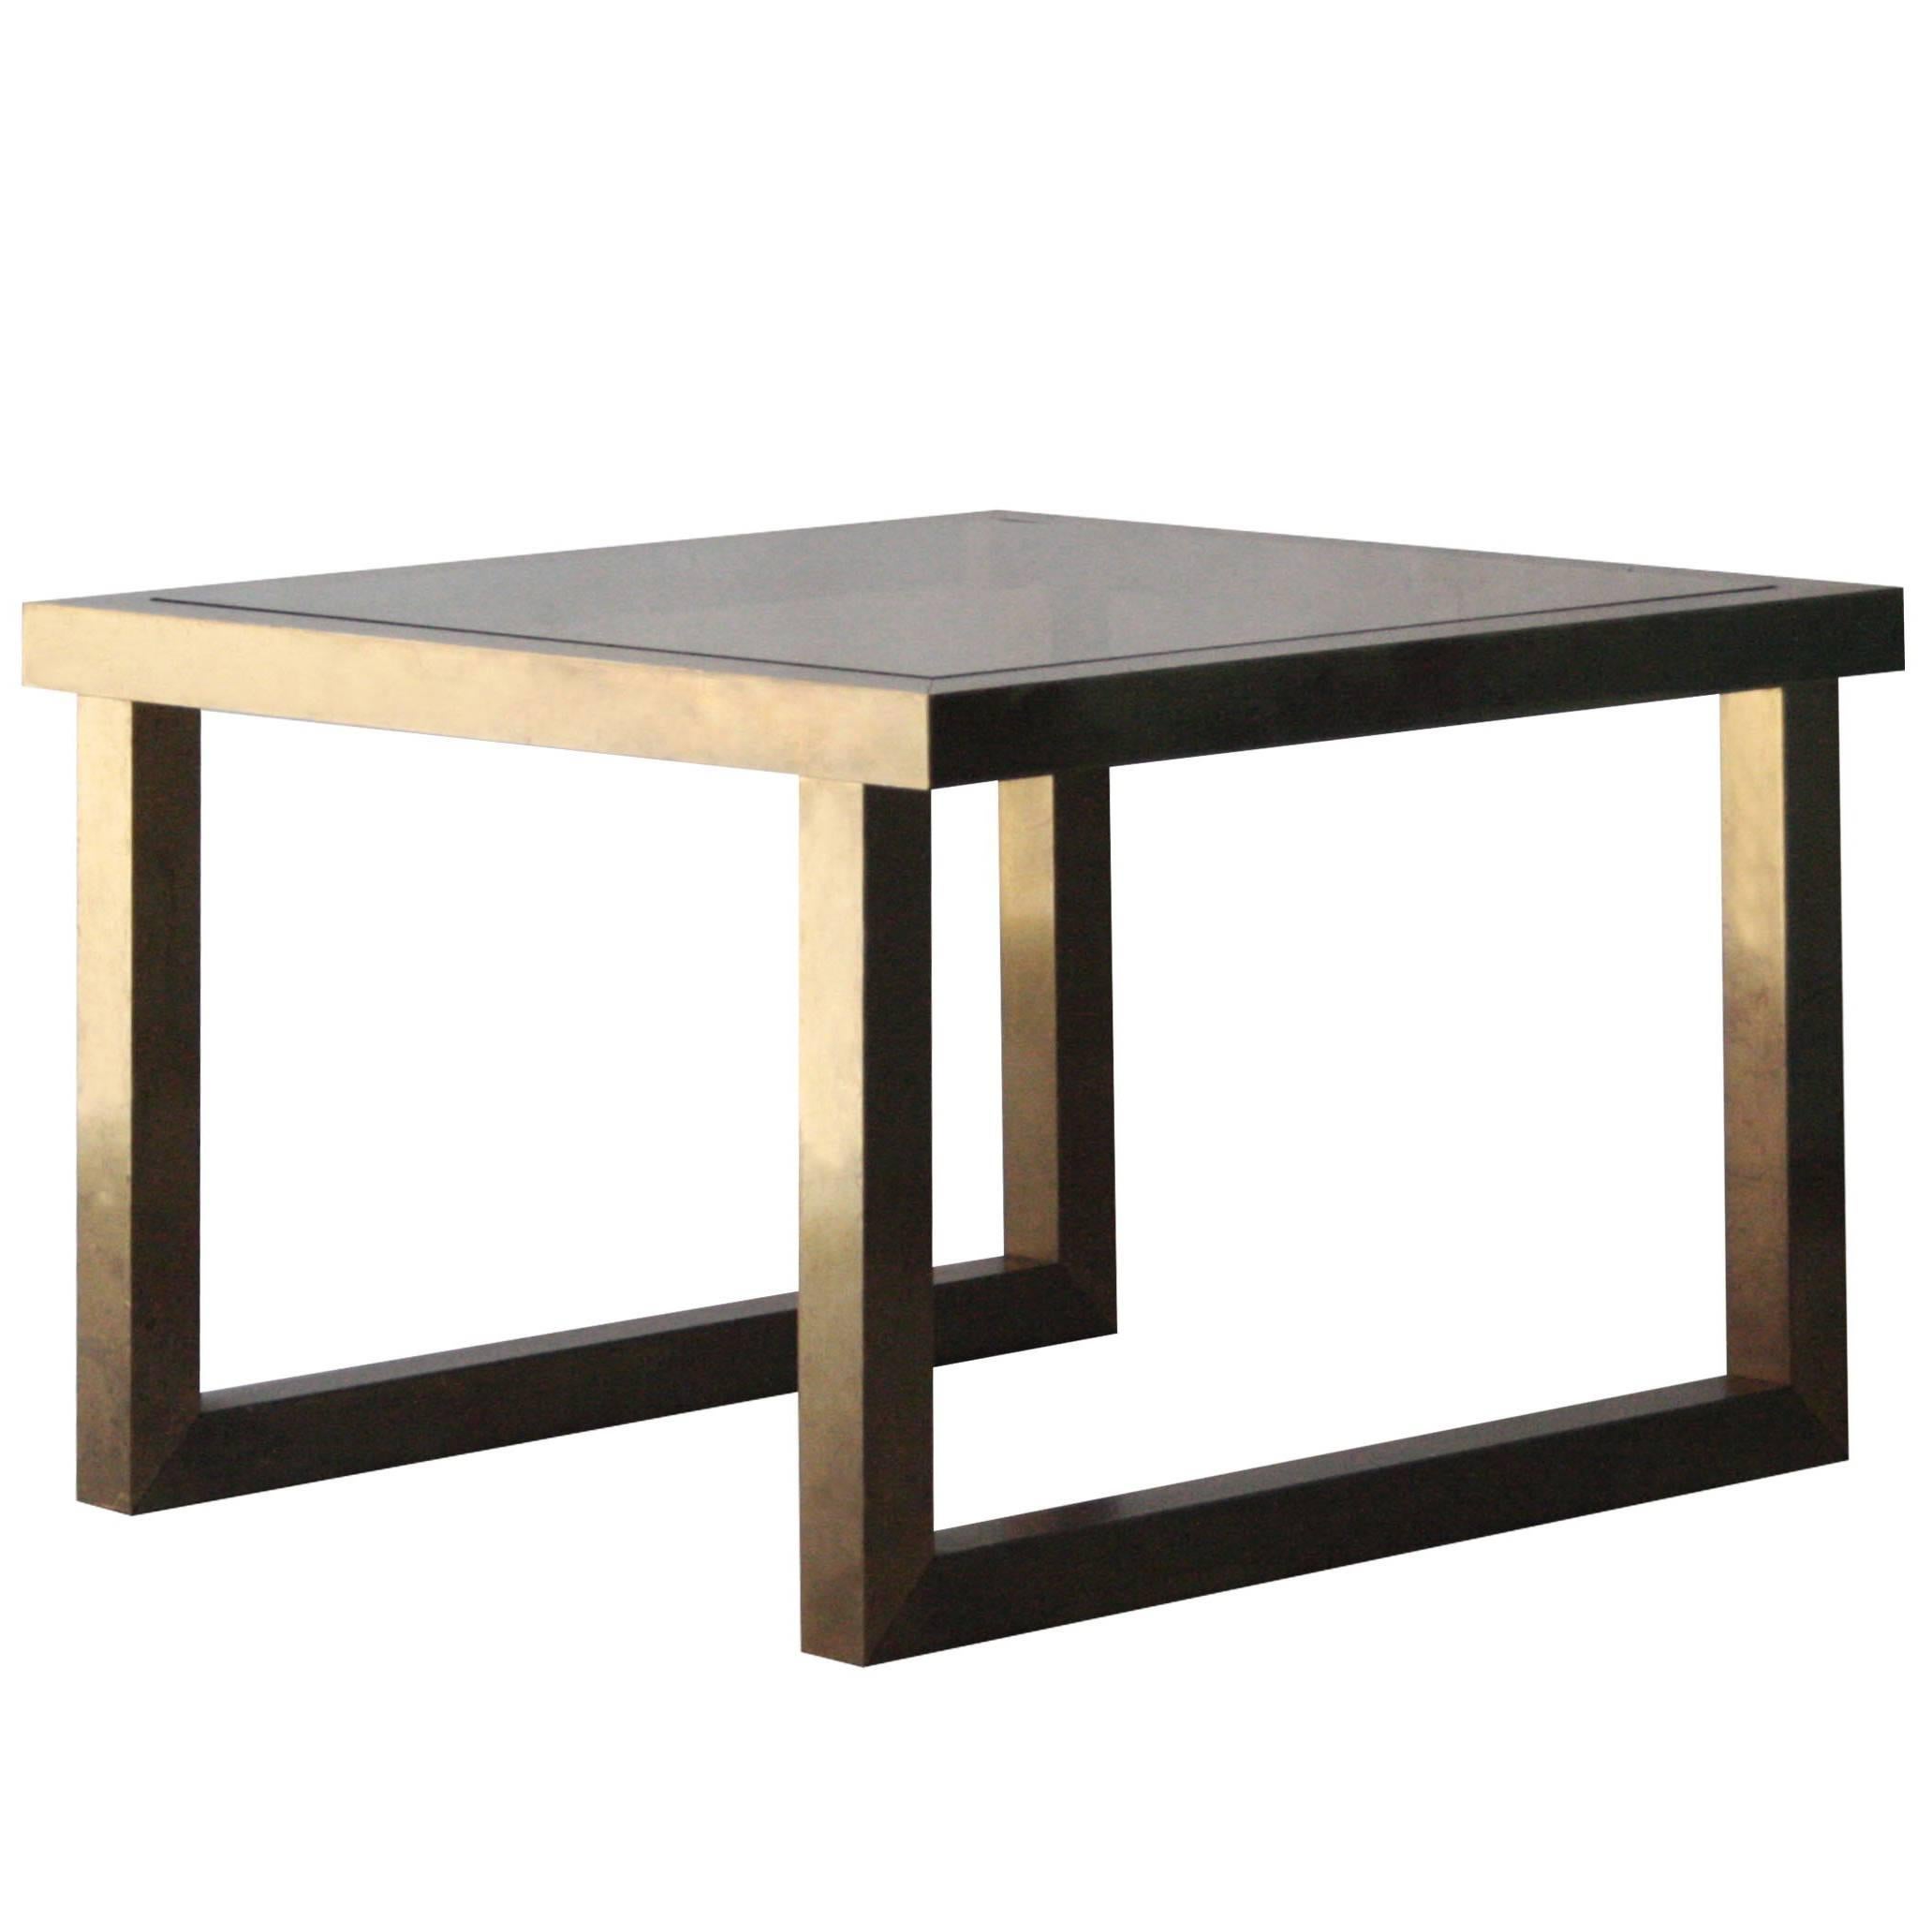 Midcentury Modern Square Brass Glass Gold Italian Side Table. Italy, 1960